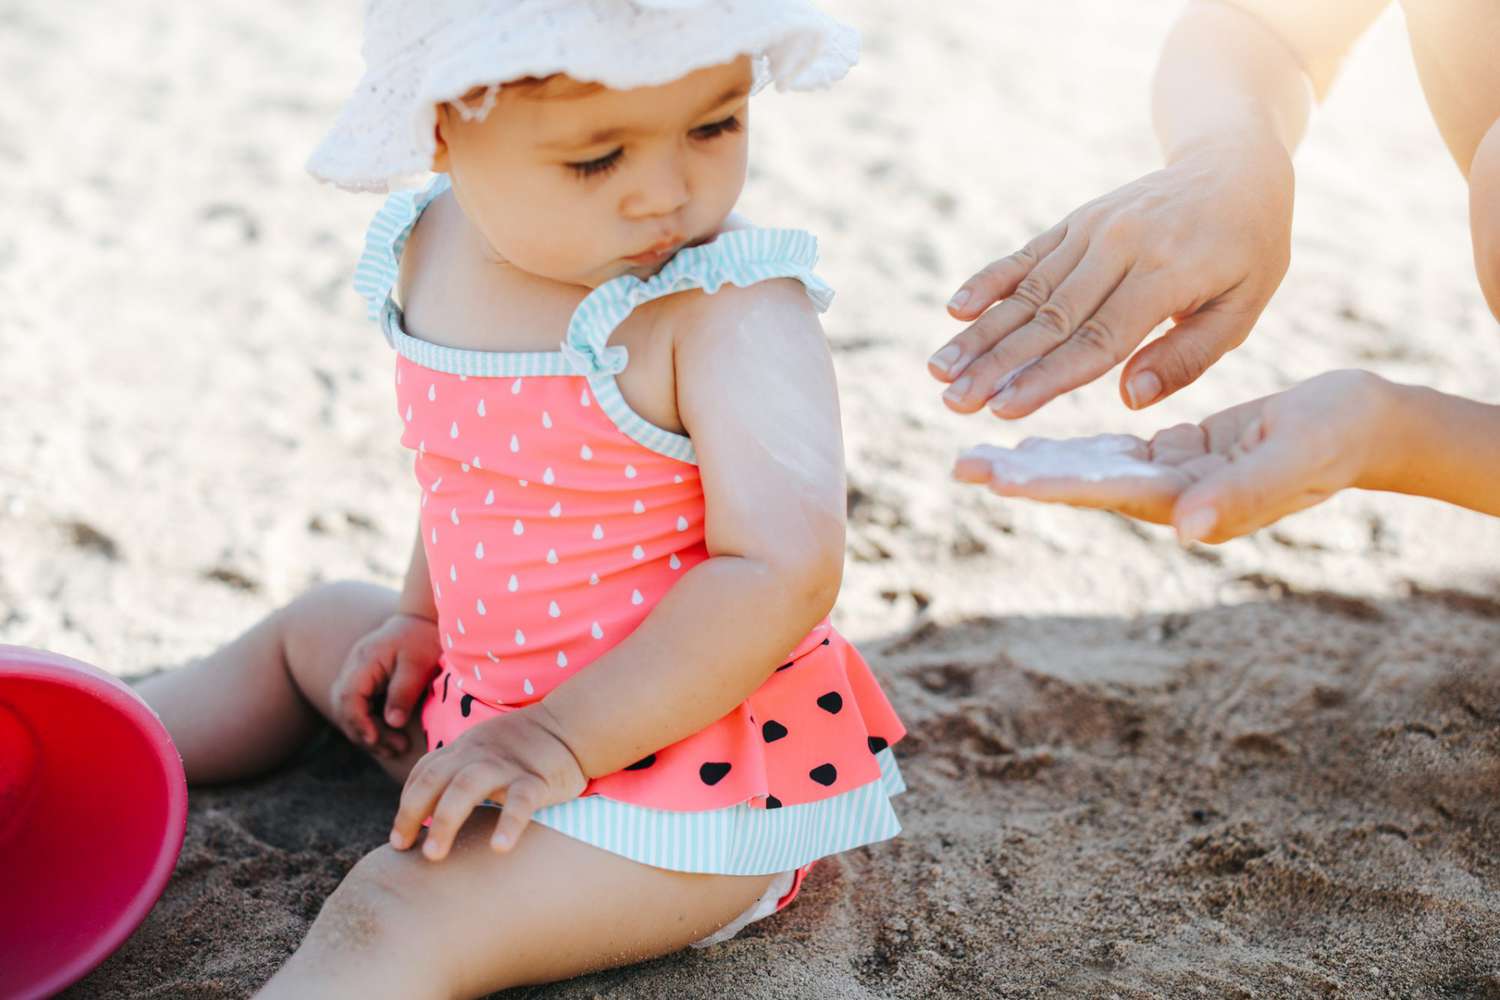 An image of a baby on a beach.